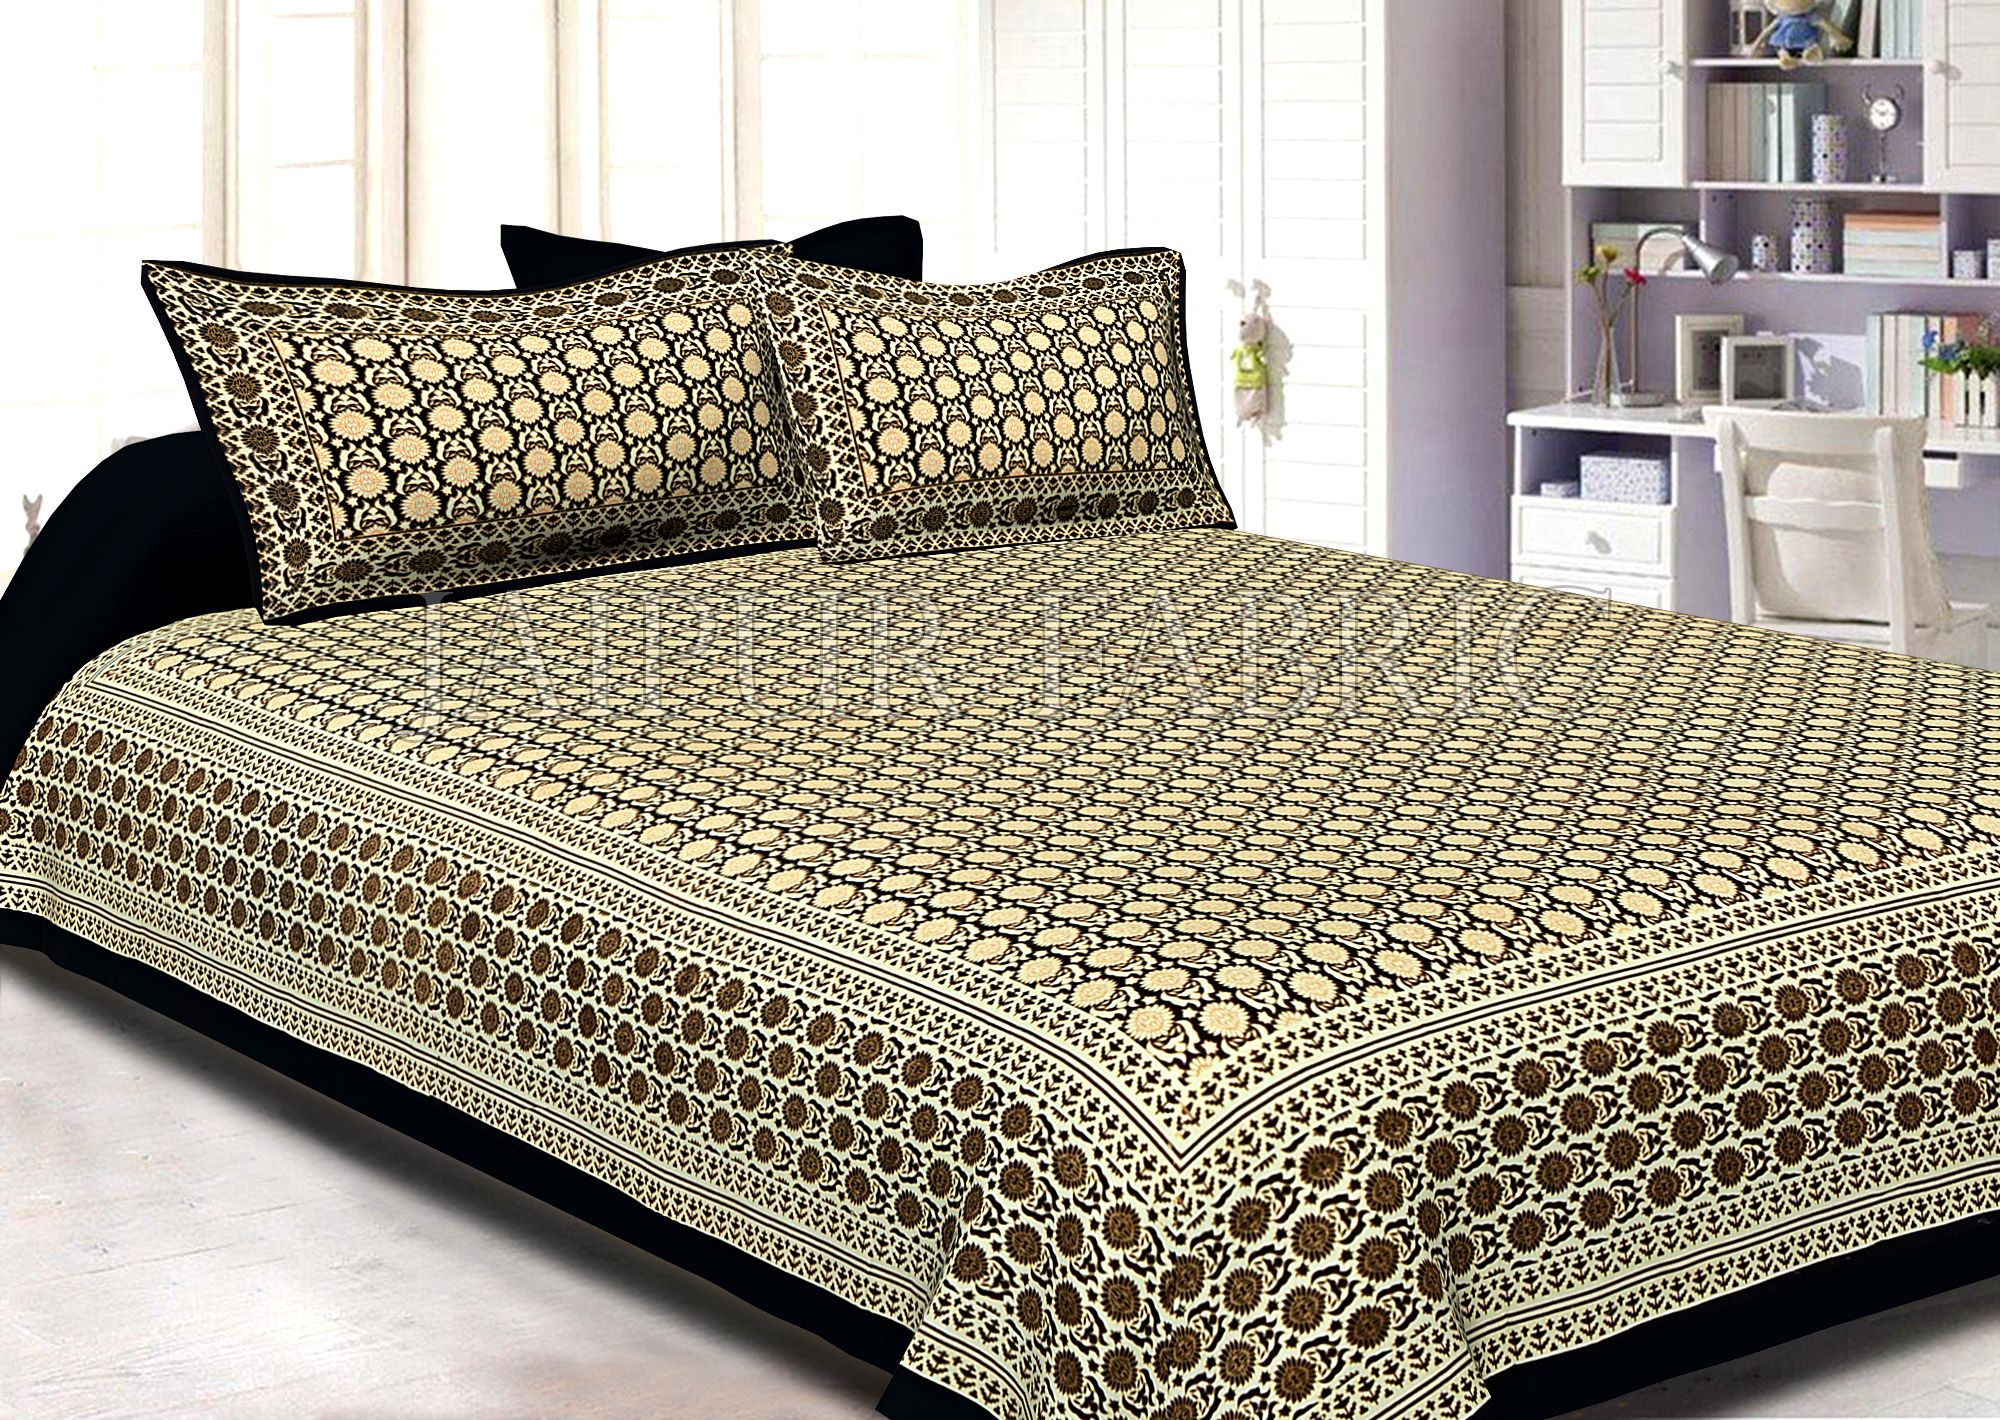 Black Border Cream Base Small Floral Pattern With Golden Print Super Fine Cotton Double Bedsheet